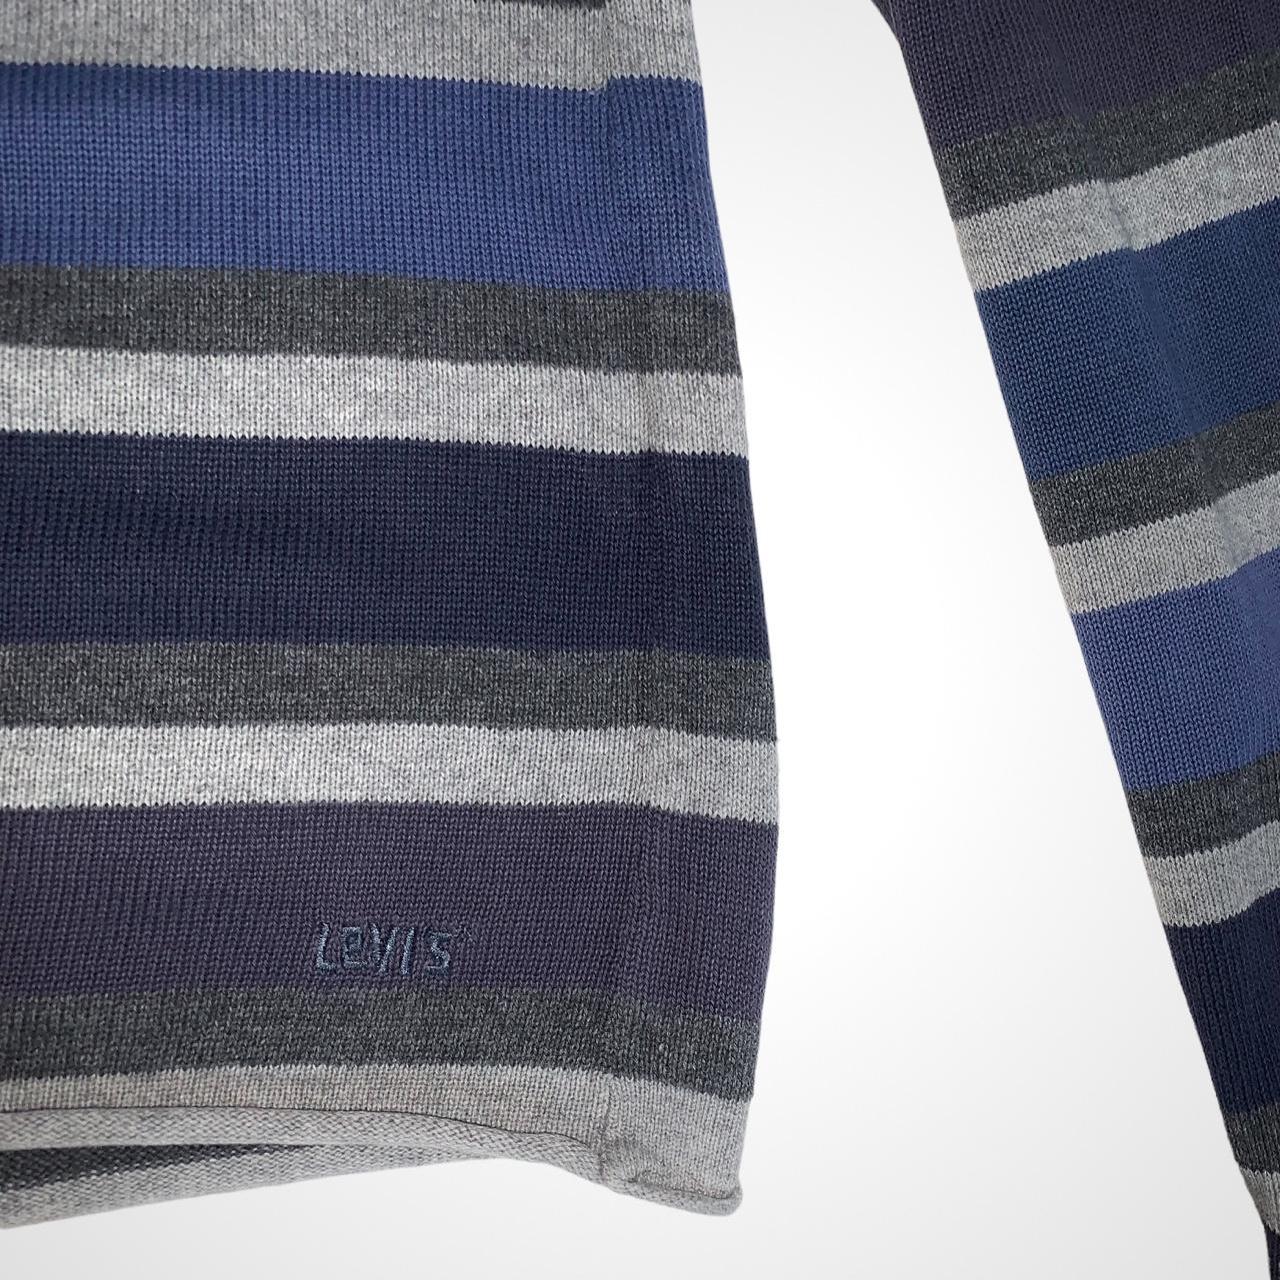 Levi’s vintage 90s blue and grey stripe knitted sweater